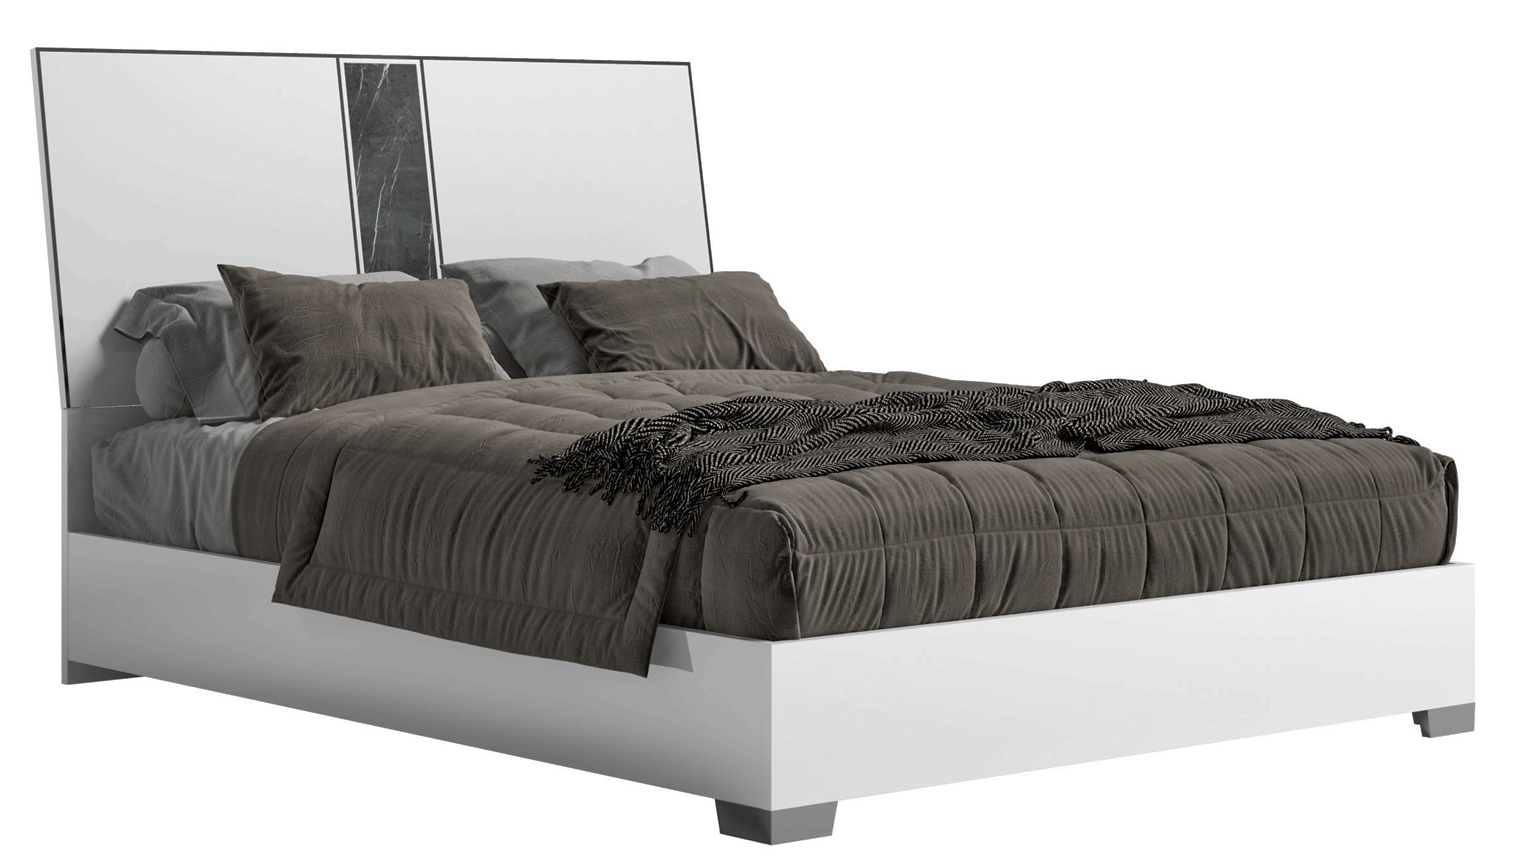 Brands Status Modern Collections, Italy Bianca Marble Bed